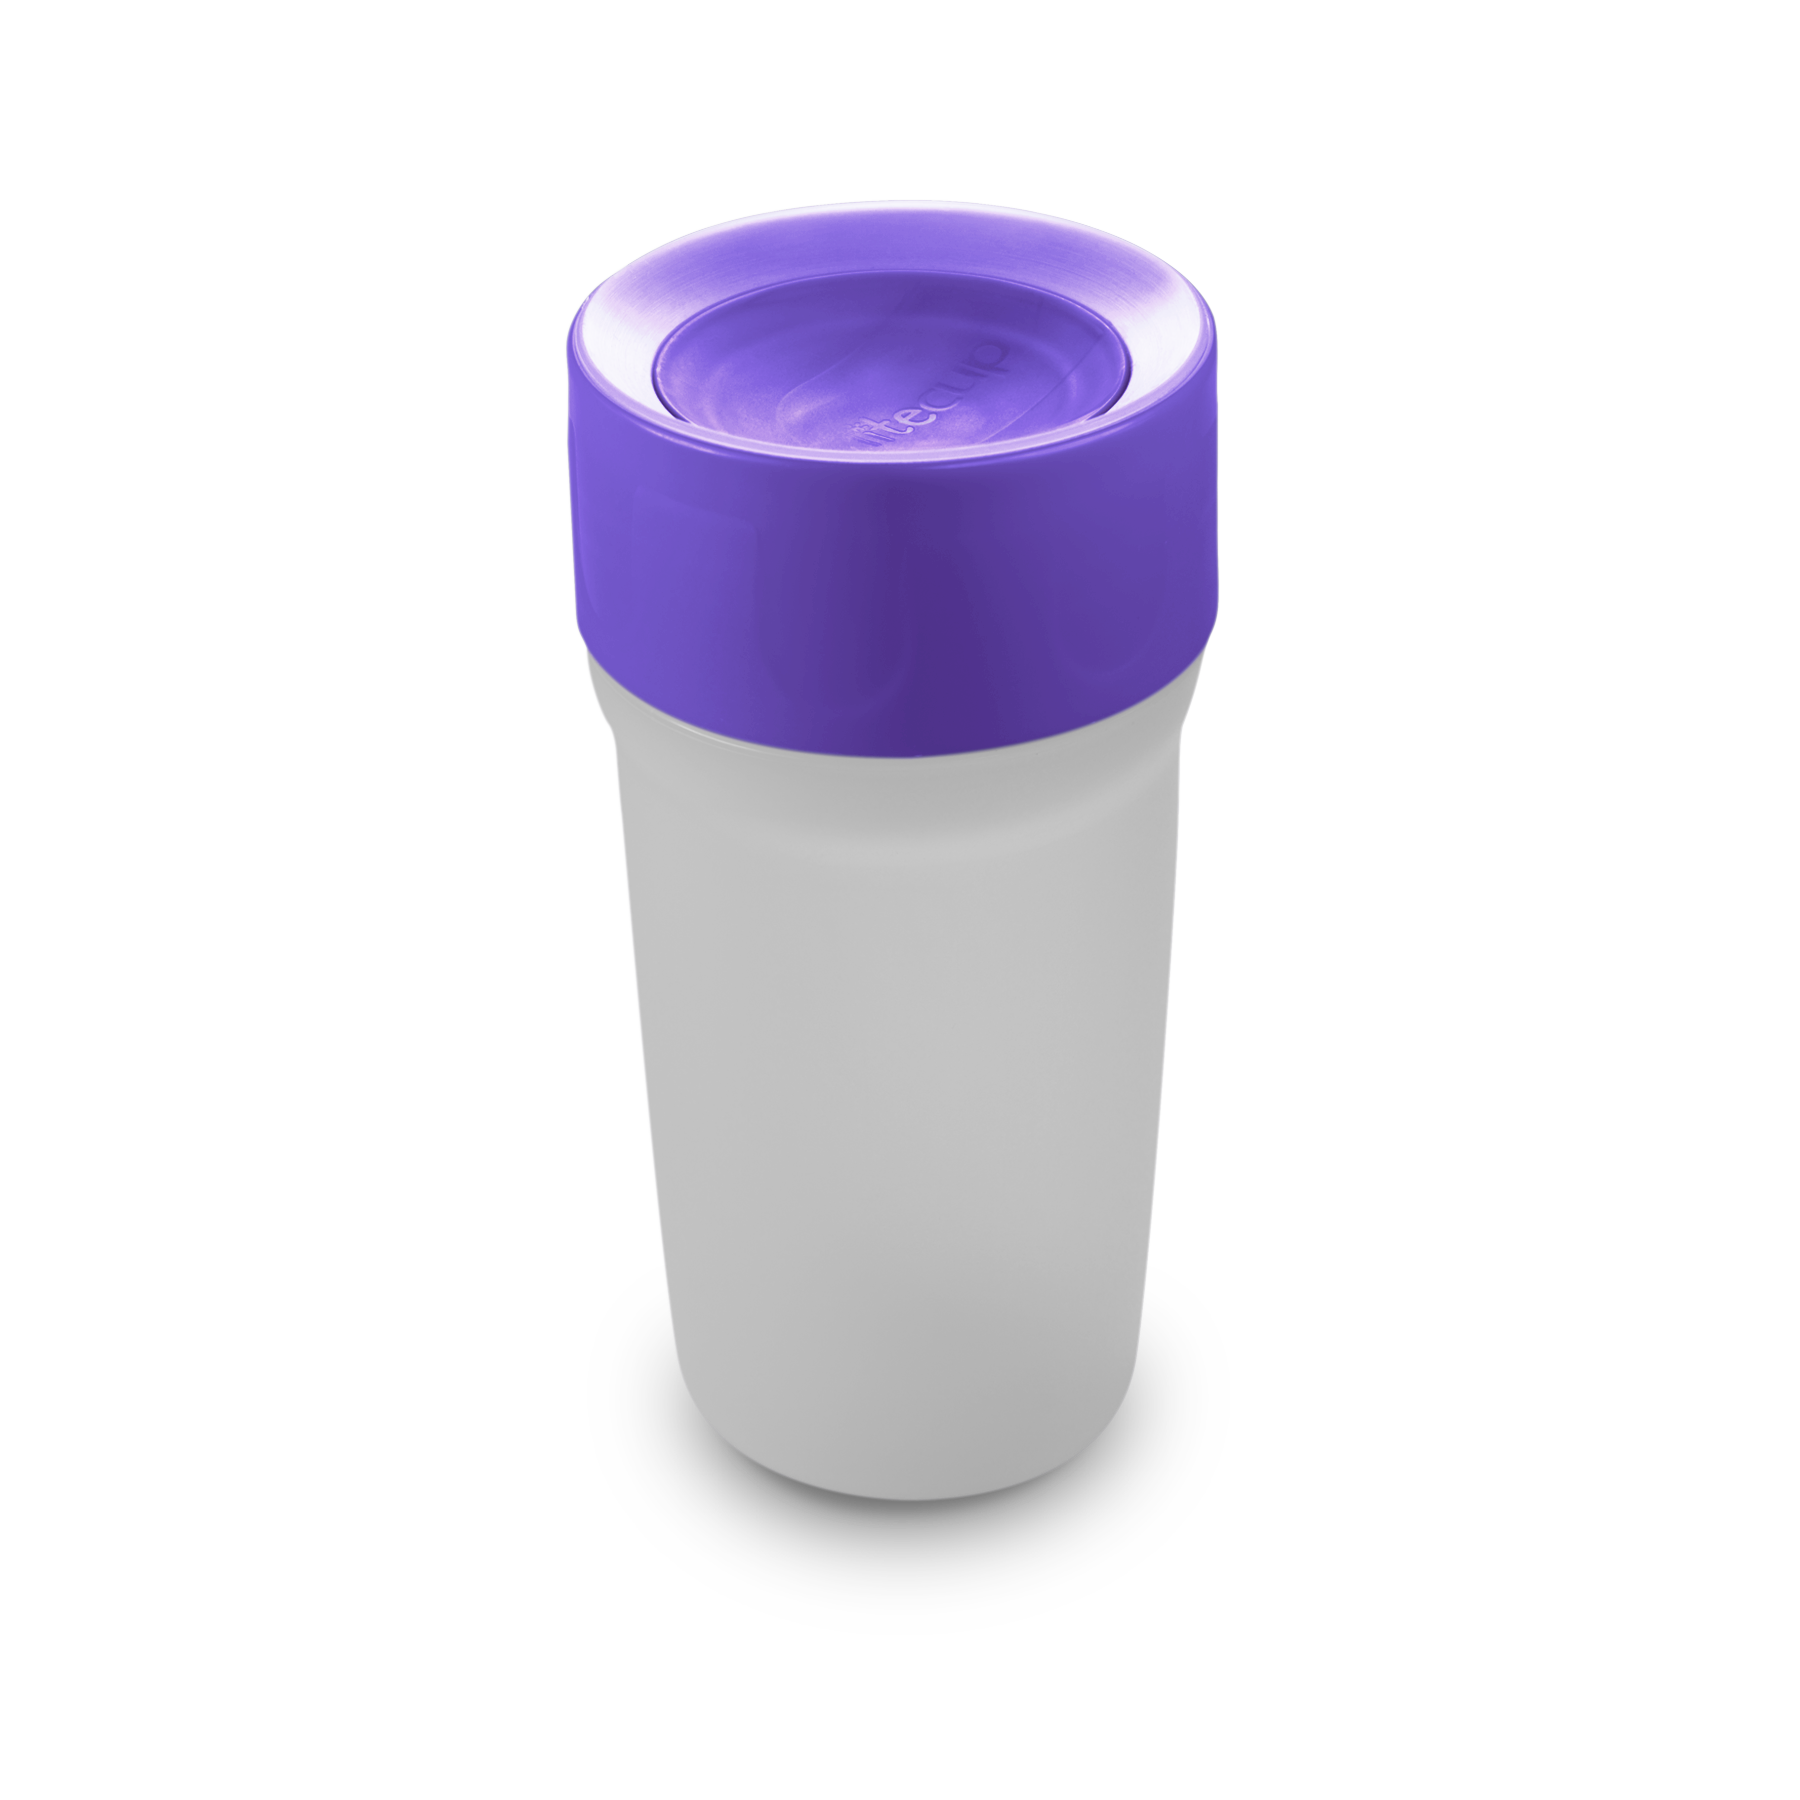 Lean Cup PNG Picture